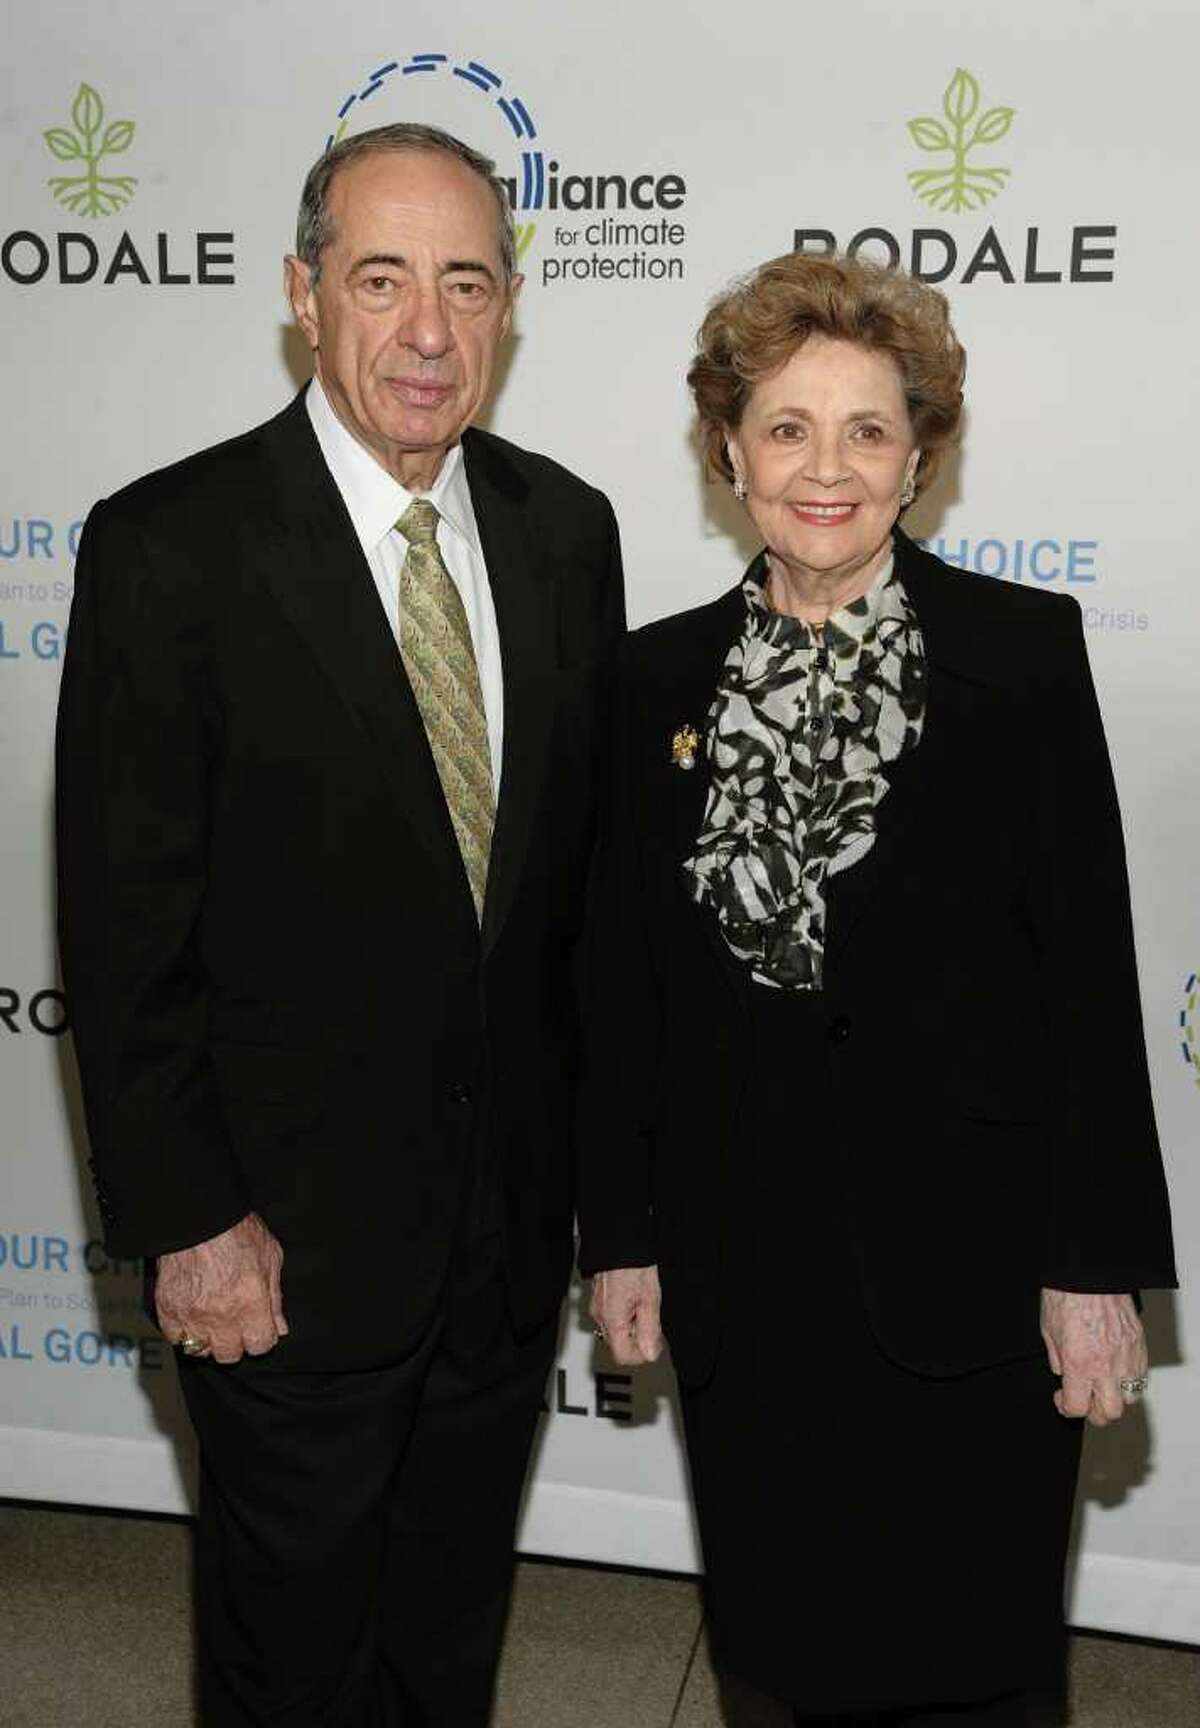 Former Gov. Mario Cuomo and Matilda Cuomo in a 2009 archive photo. (Archive/Getty Images for Rodale)